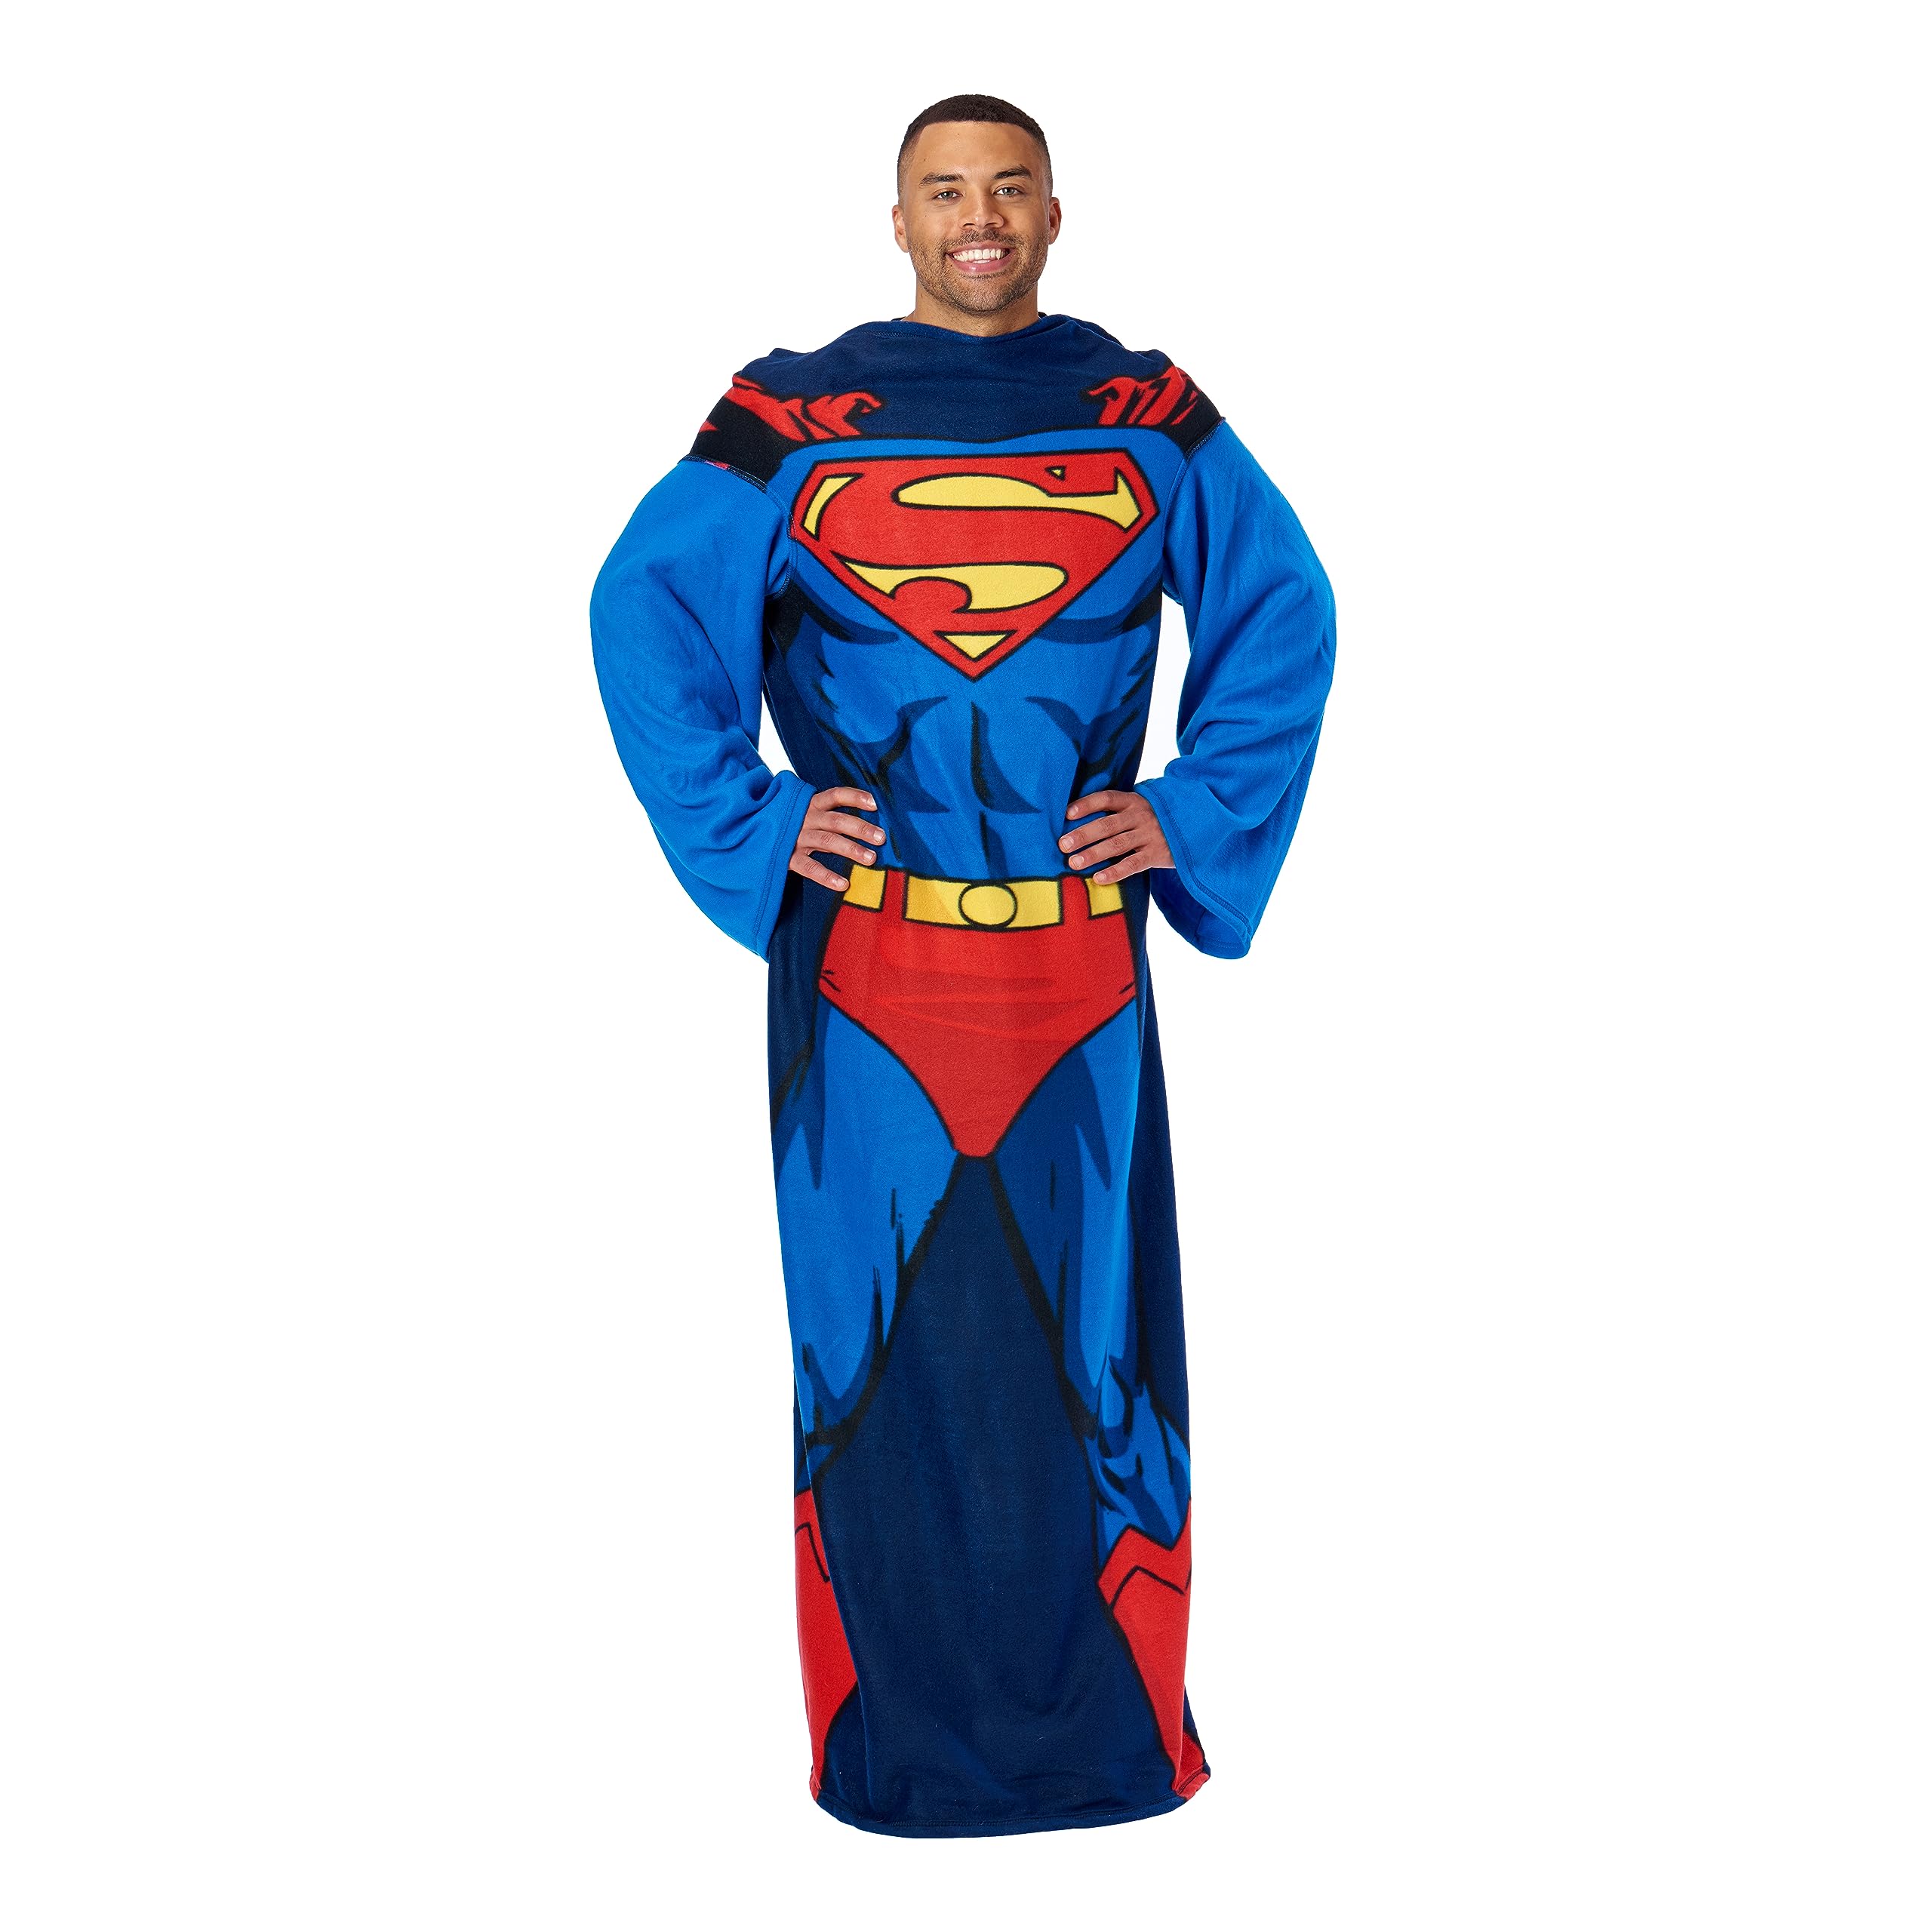 48"x71" Northwest The Company Wearable Blanket (Superman, Spongebob, More) from $20.87 + Free Shipping w/ Prime or on $35+